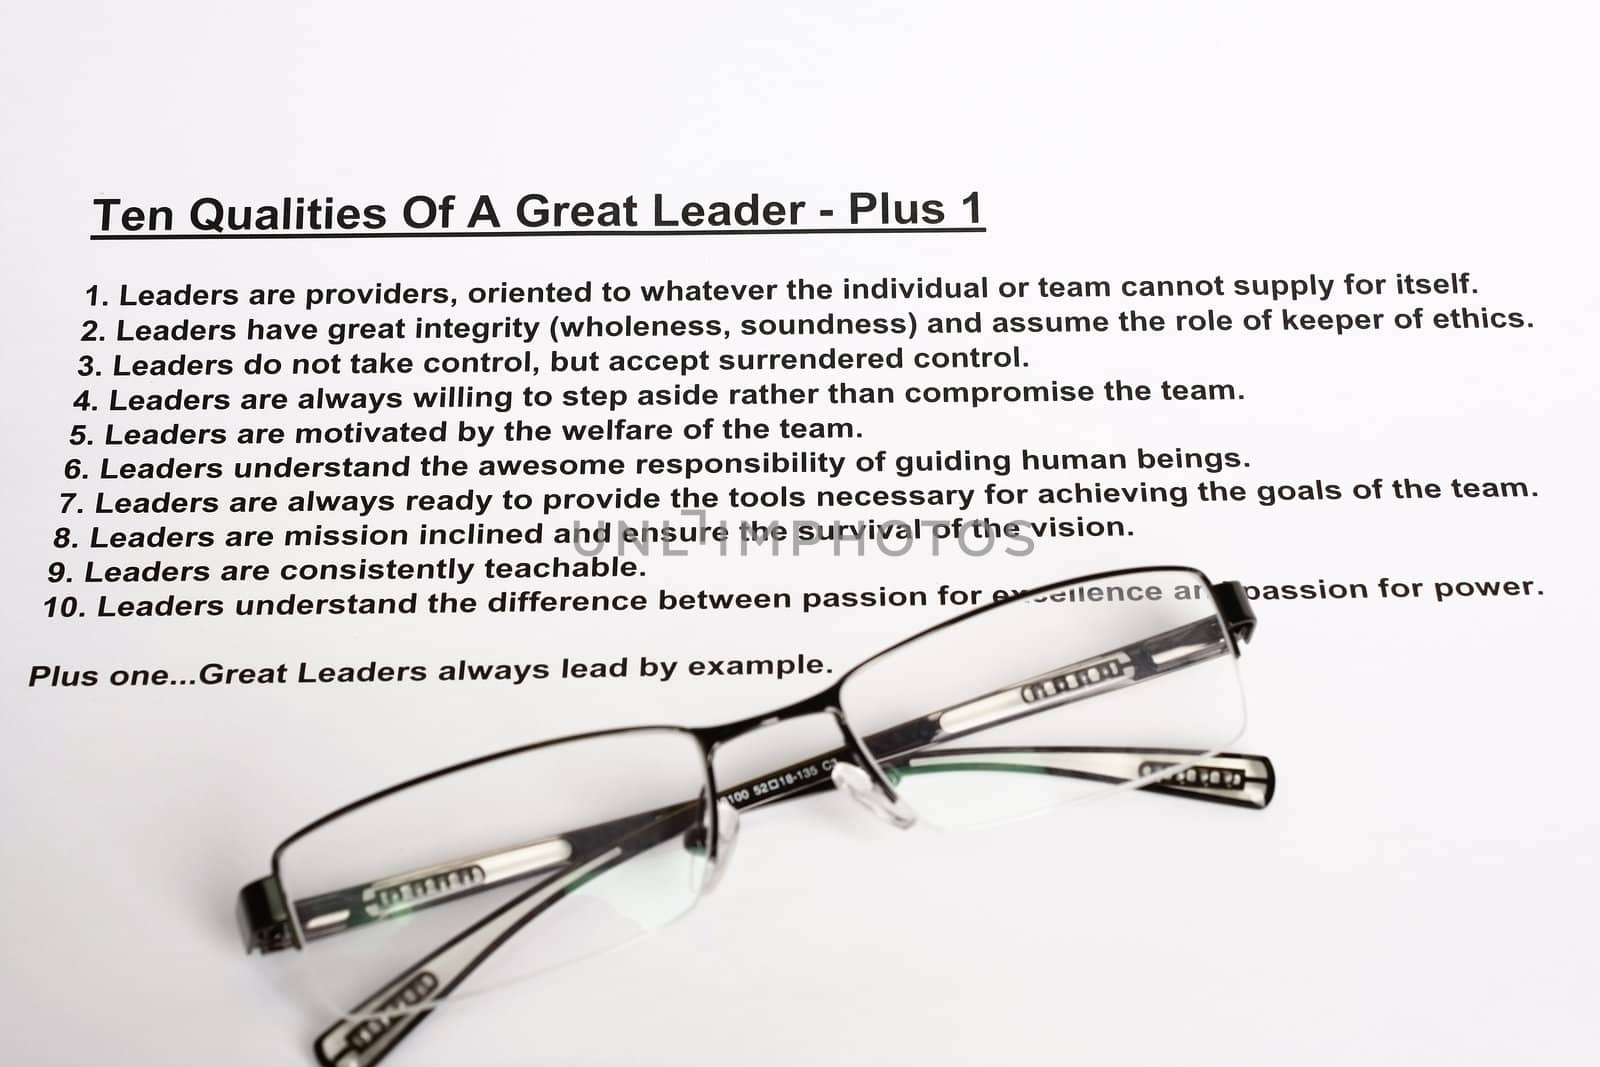 Ten qualities of a great leader - plus 1 by sacatani